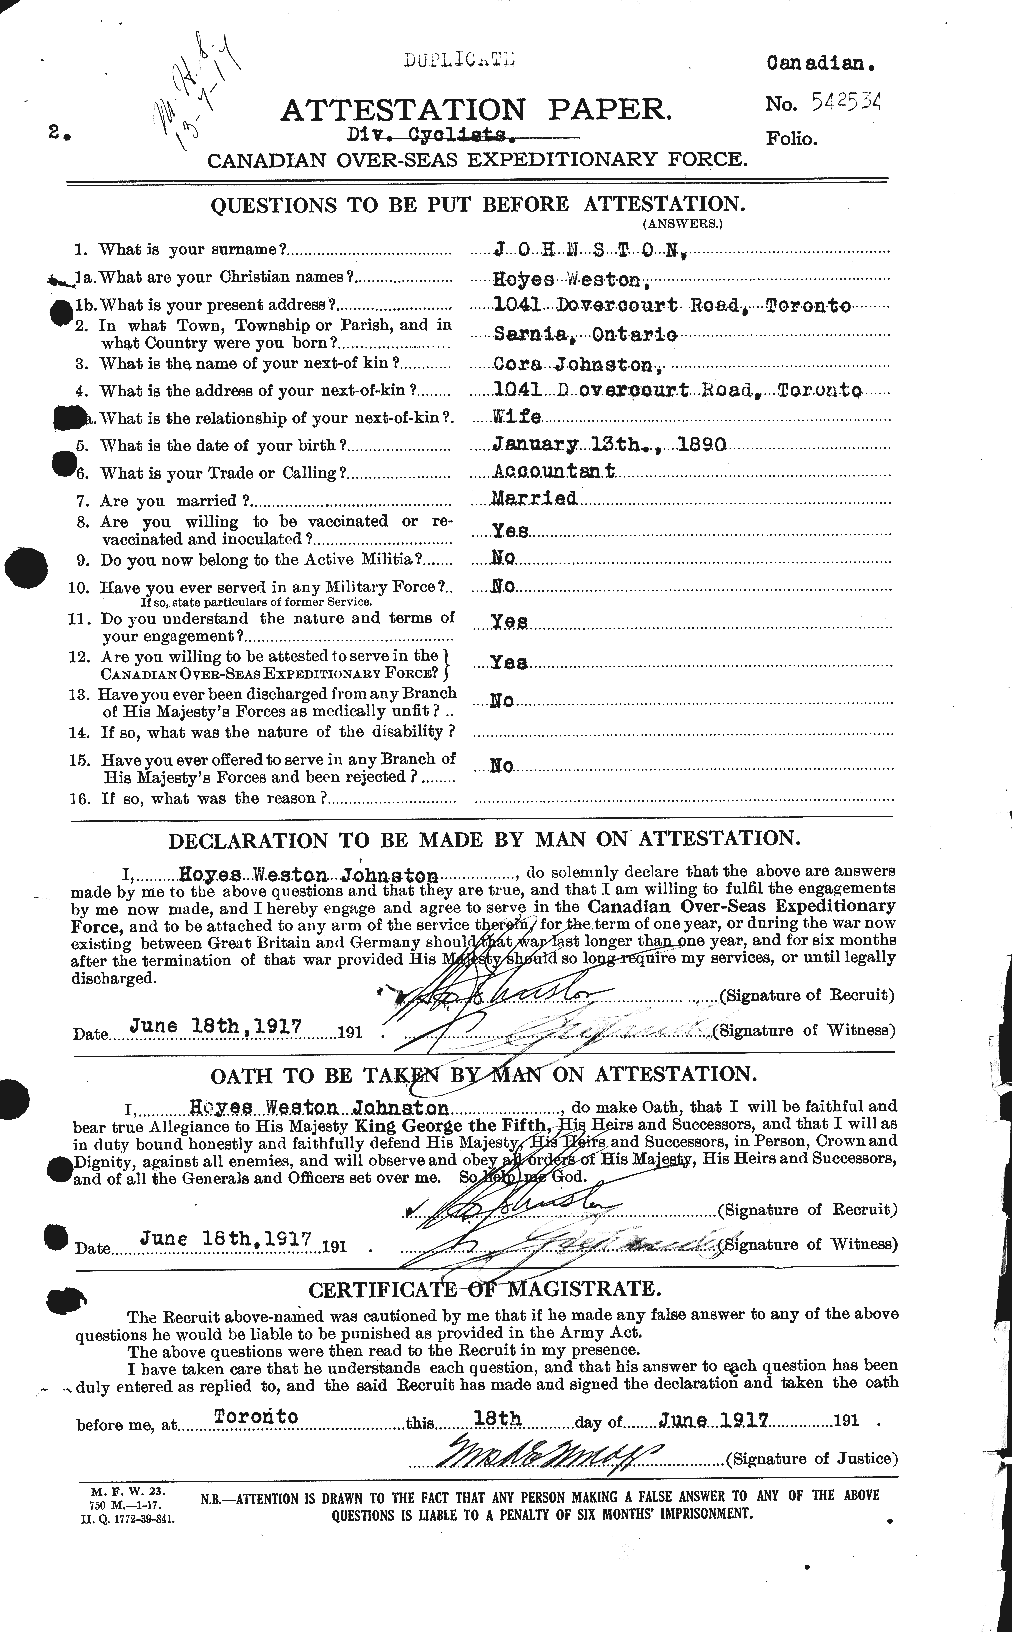 Personnel Records of the First World War - CEF 422656a